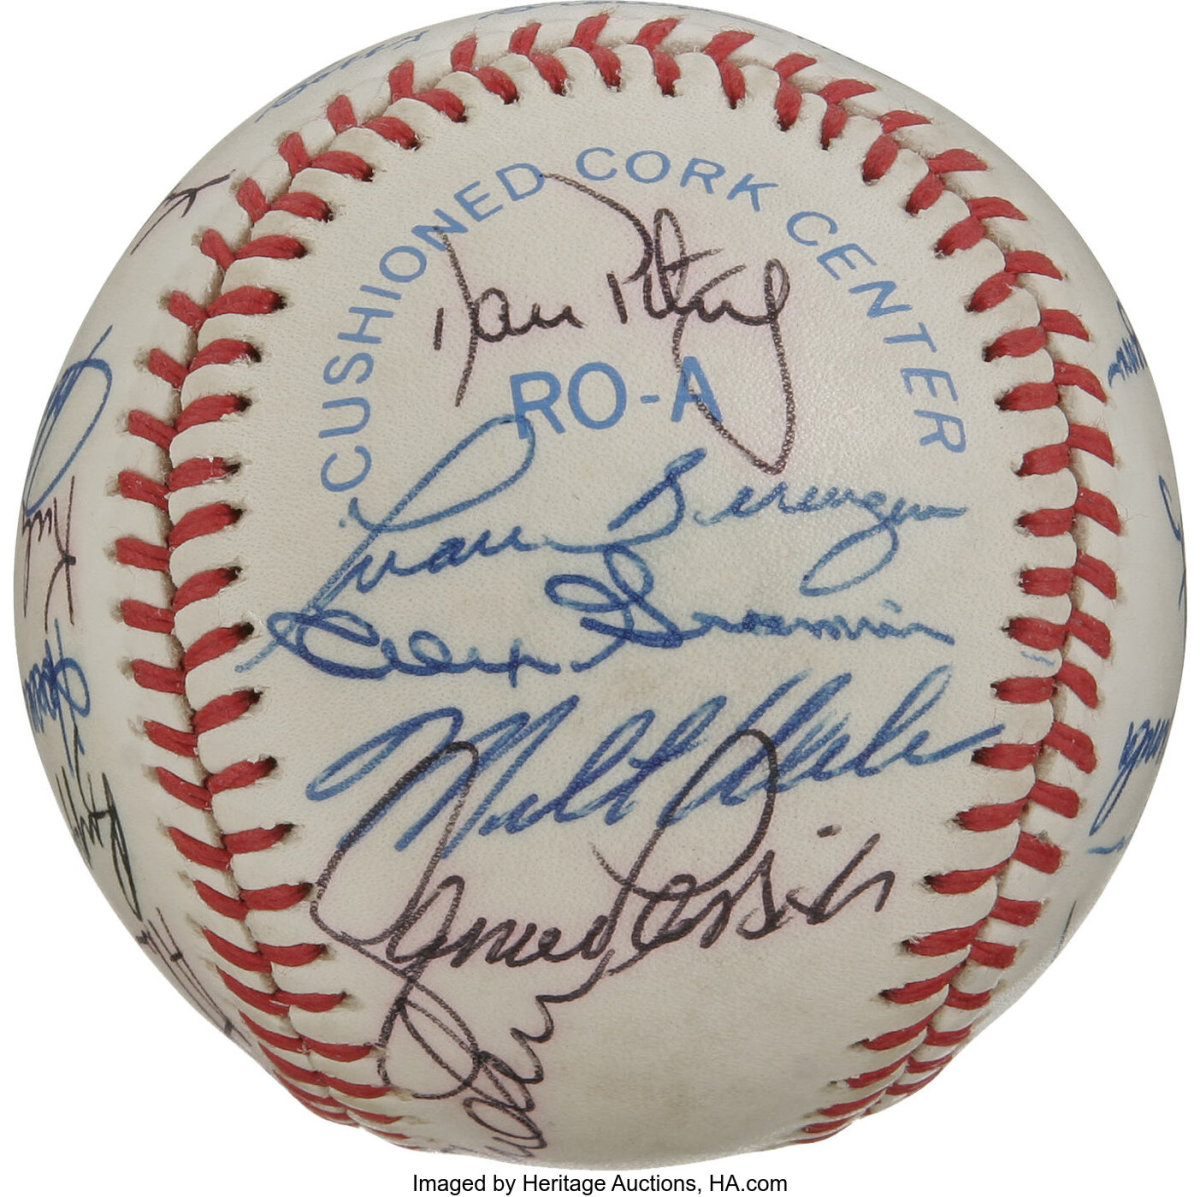 Baseball signed by Lance Parrish and his Detroit Tigers teammates from the 1984 World Series team.